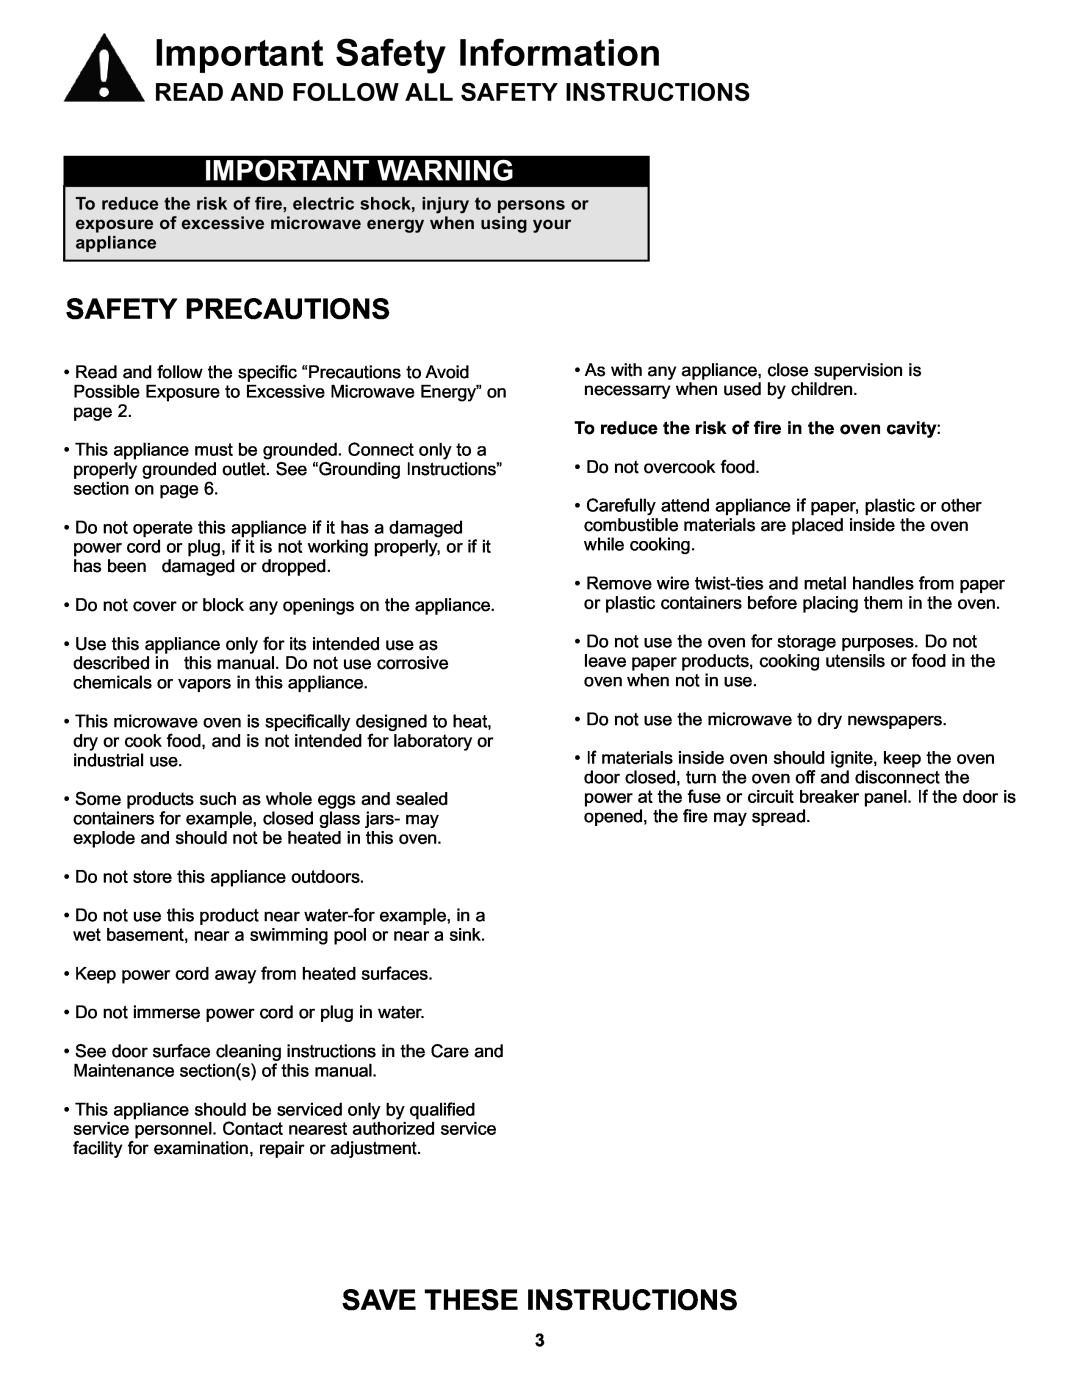 Danby DMW111KWDB manual Important Warning, Safety Precautions, Important Safety Information, Save These Instructions 